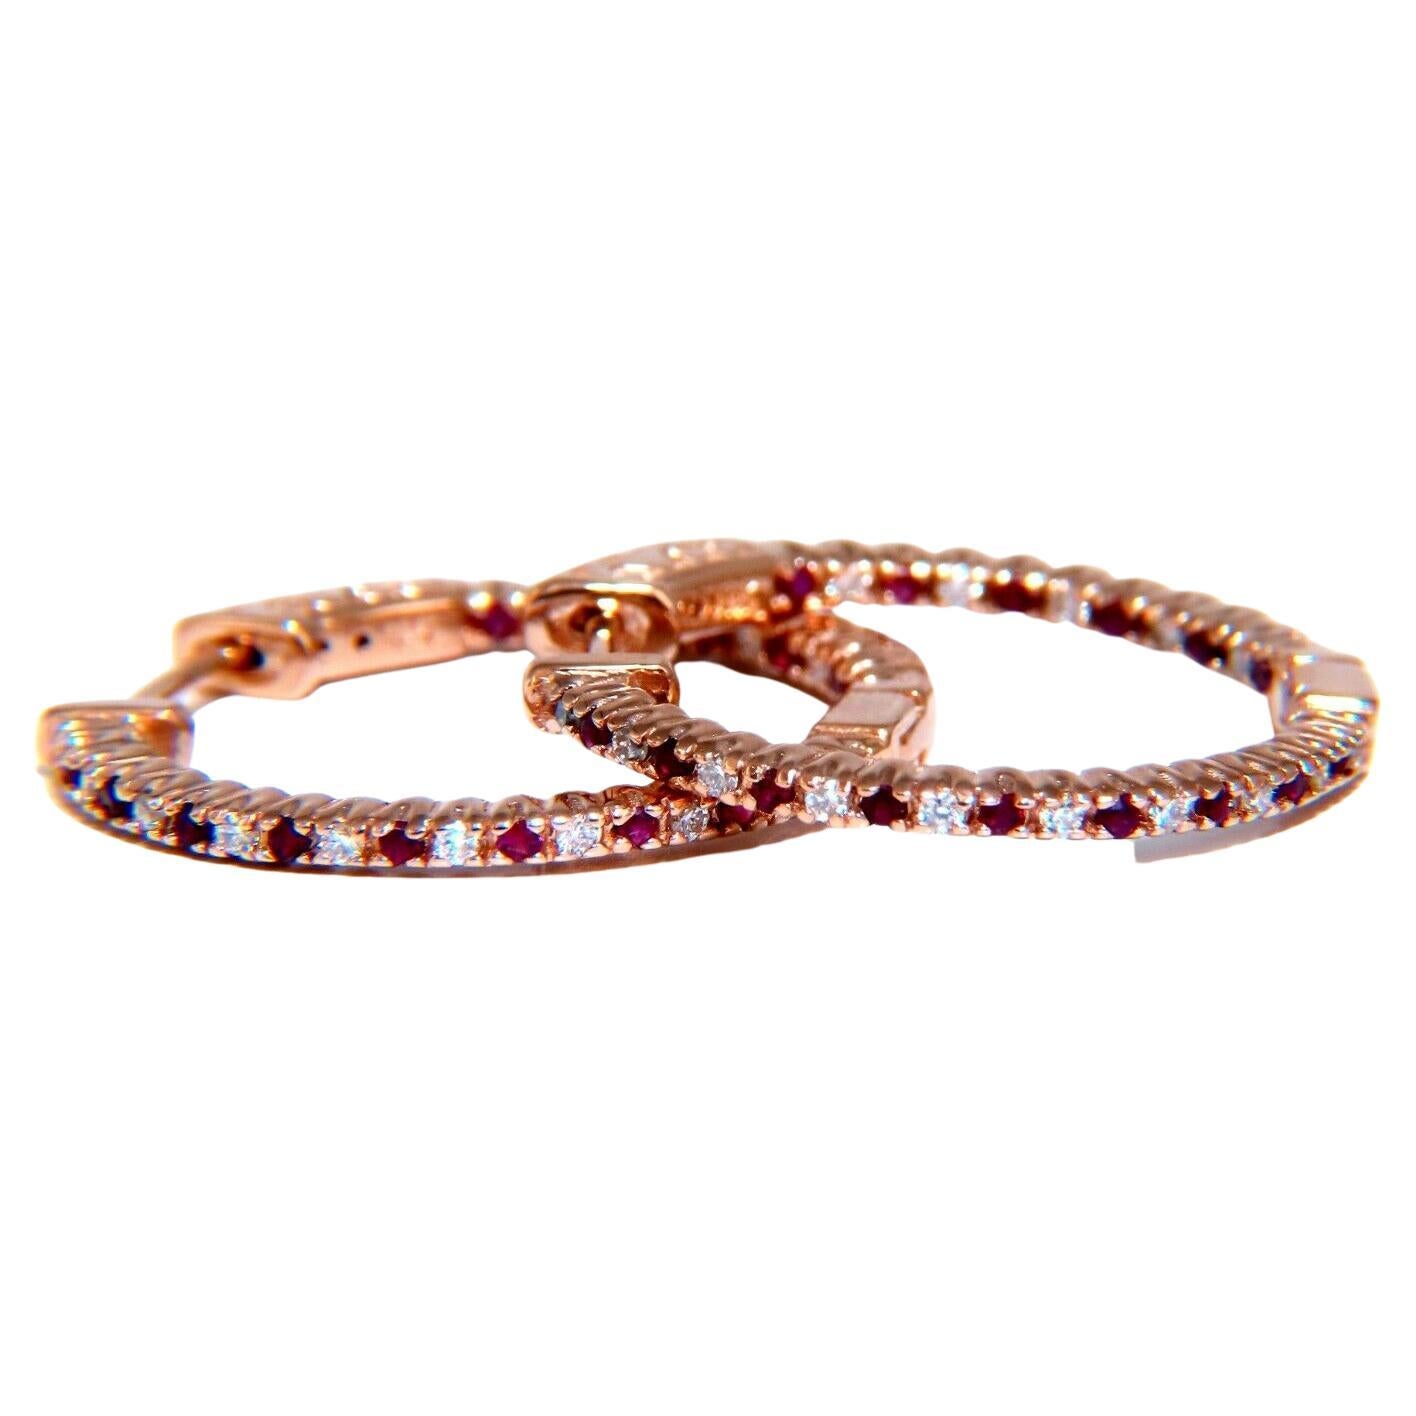 .58ct Natural Ruby Diamonds Hoop Earrings 14kt Rose Gold Inside Out For Sale